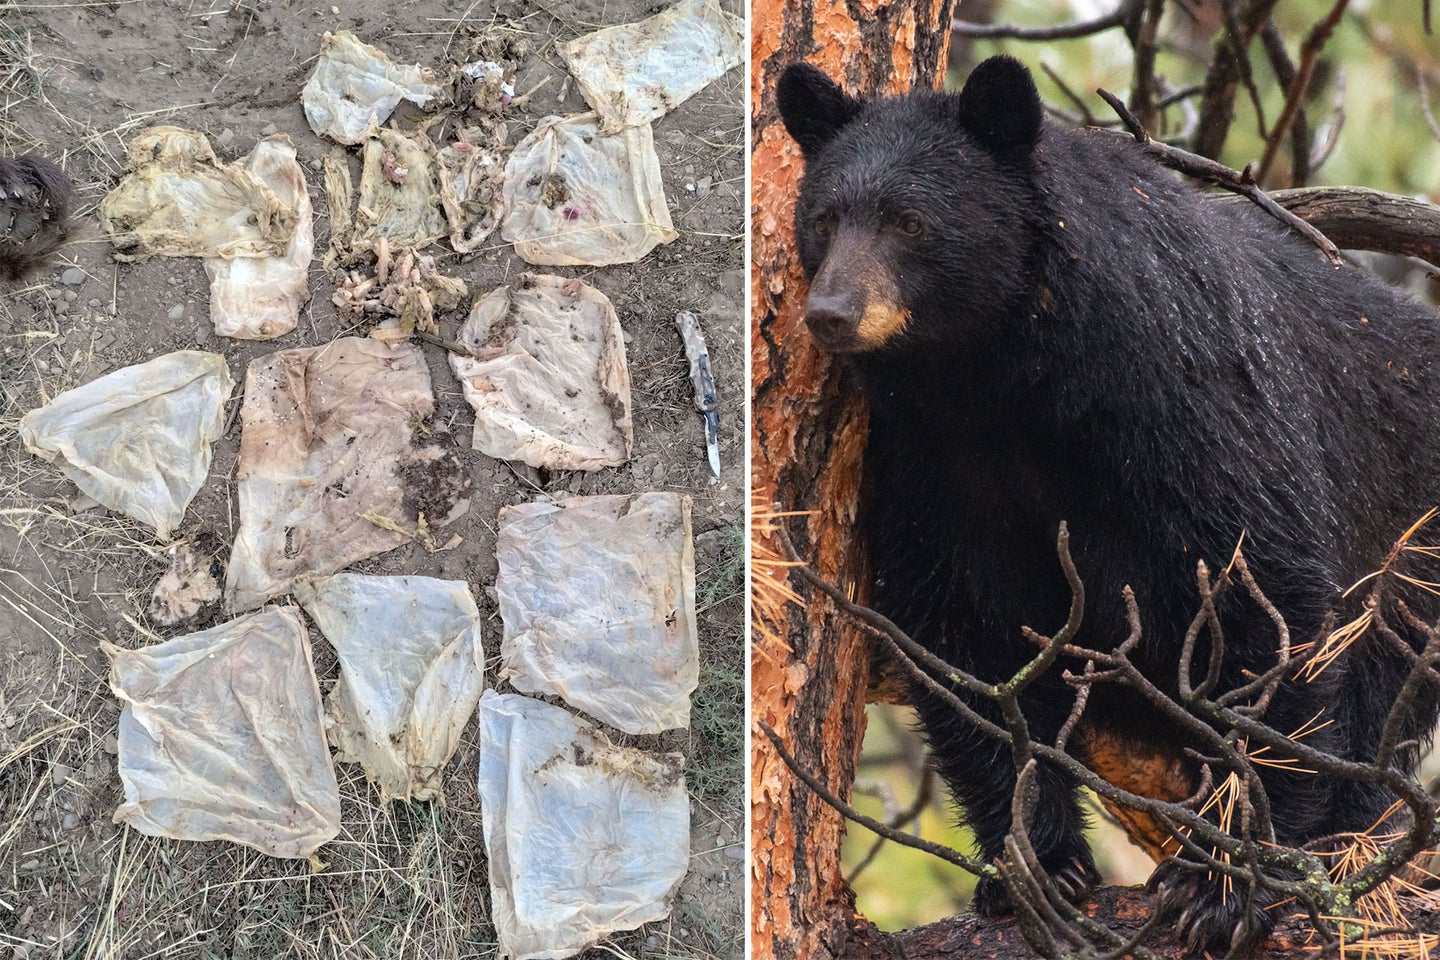 The bear has been raiding trash cans and causing conflict in Telluride, Colorado all summer, CPW said. 